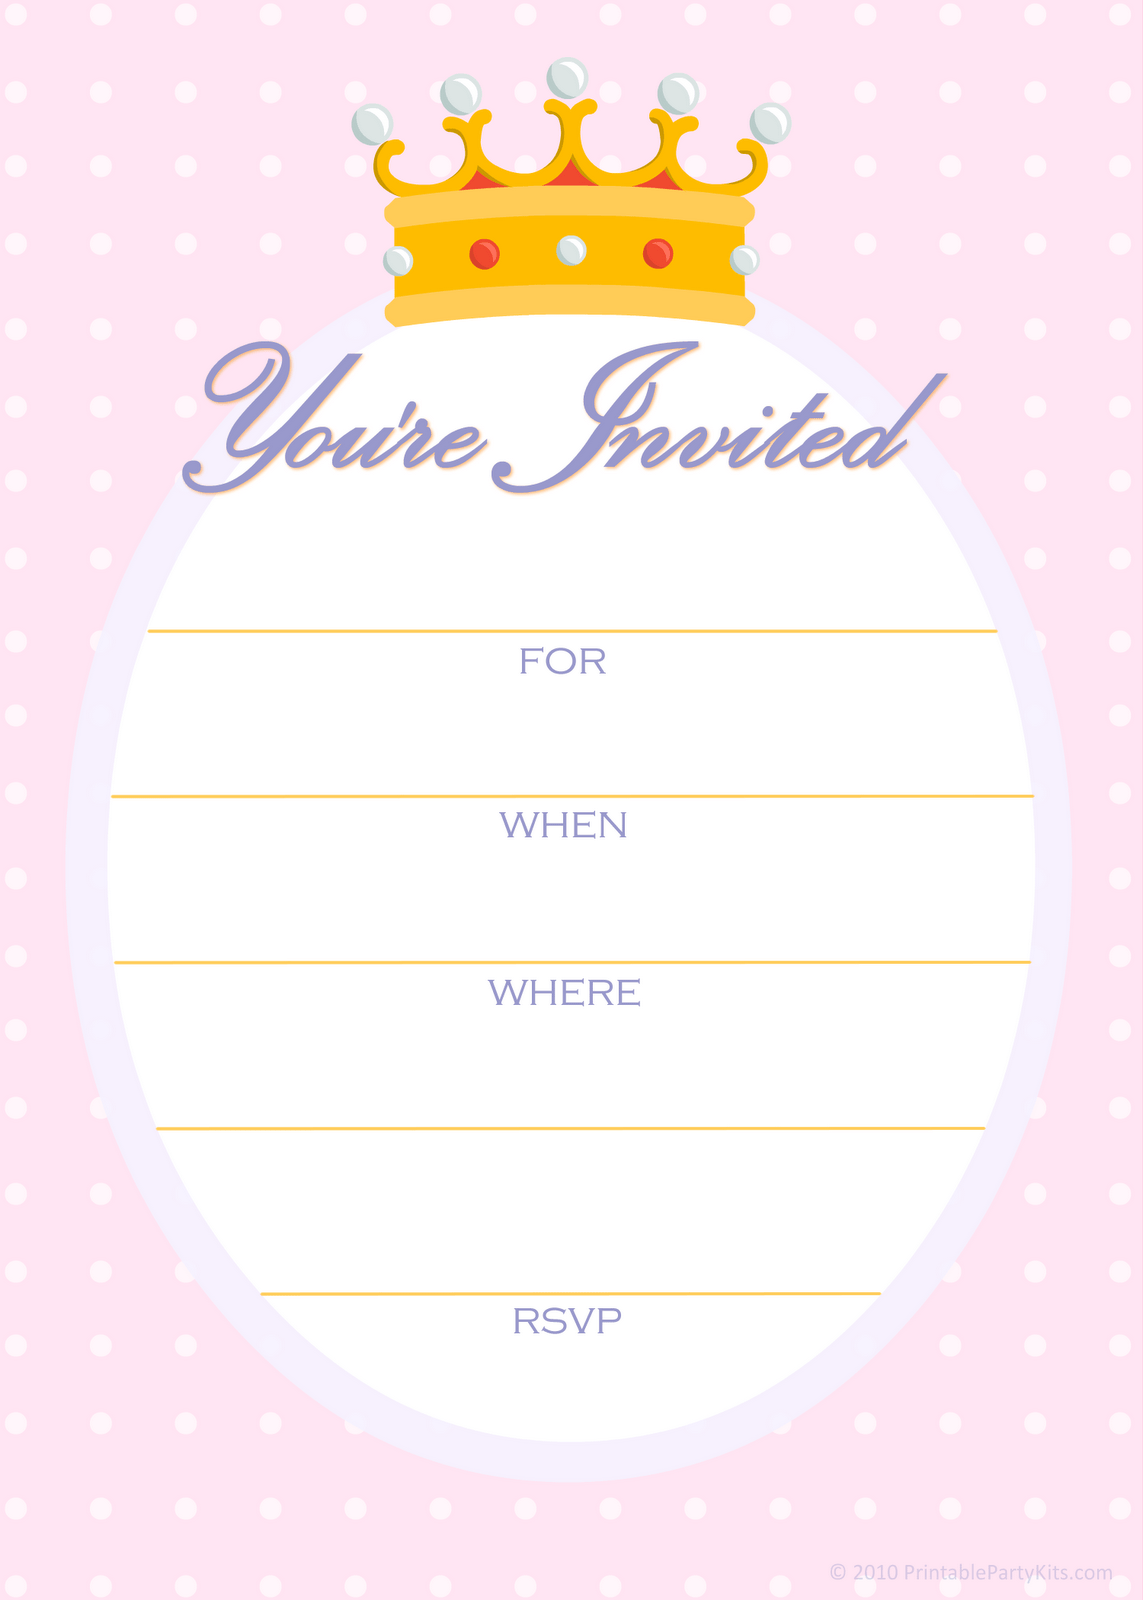 Free Printable Party Invitations Templates | Party ...